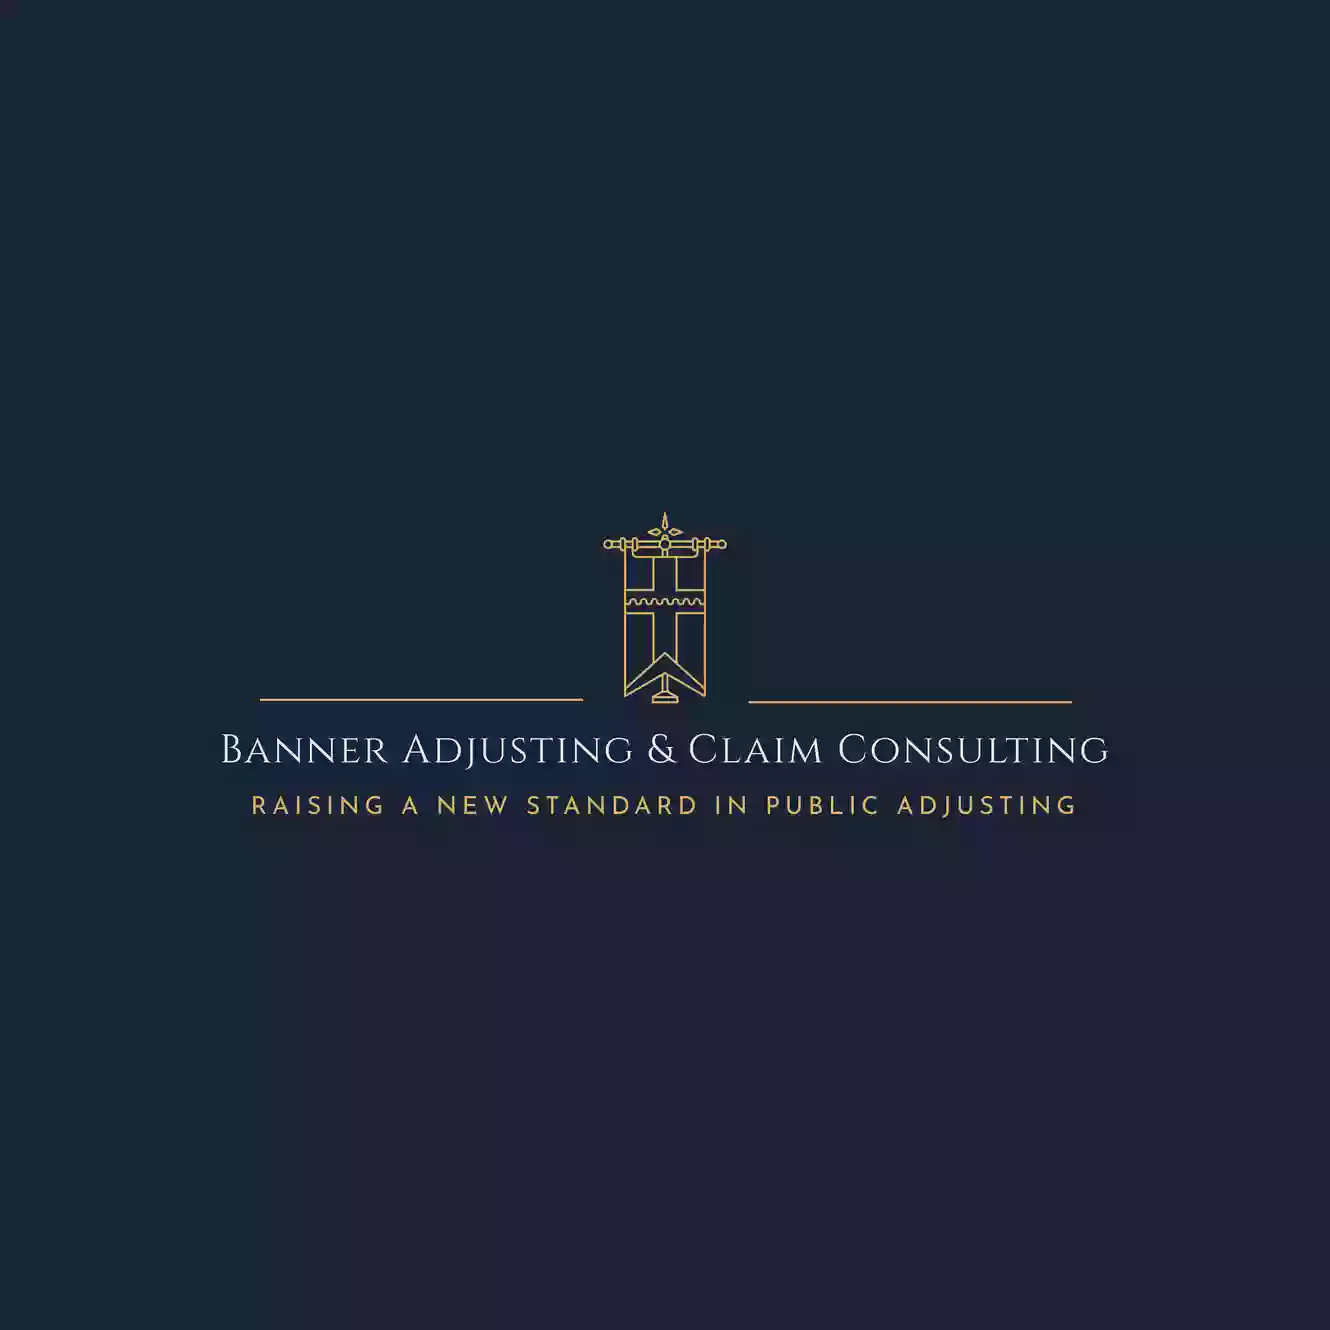 Banner Adjusting & Claim Consulting